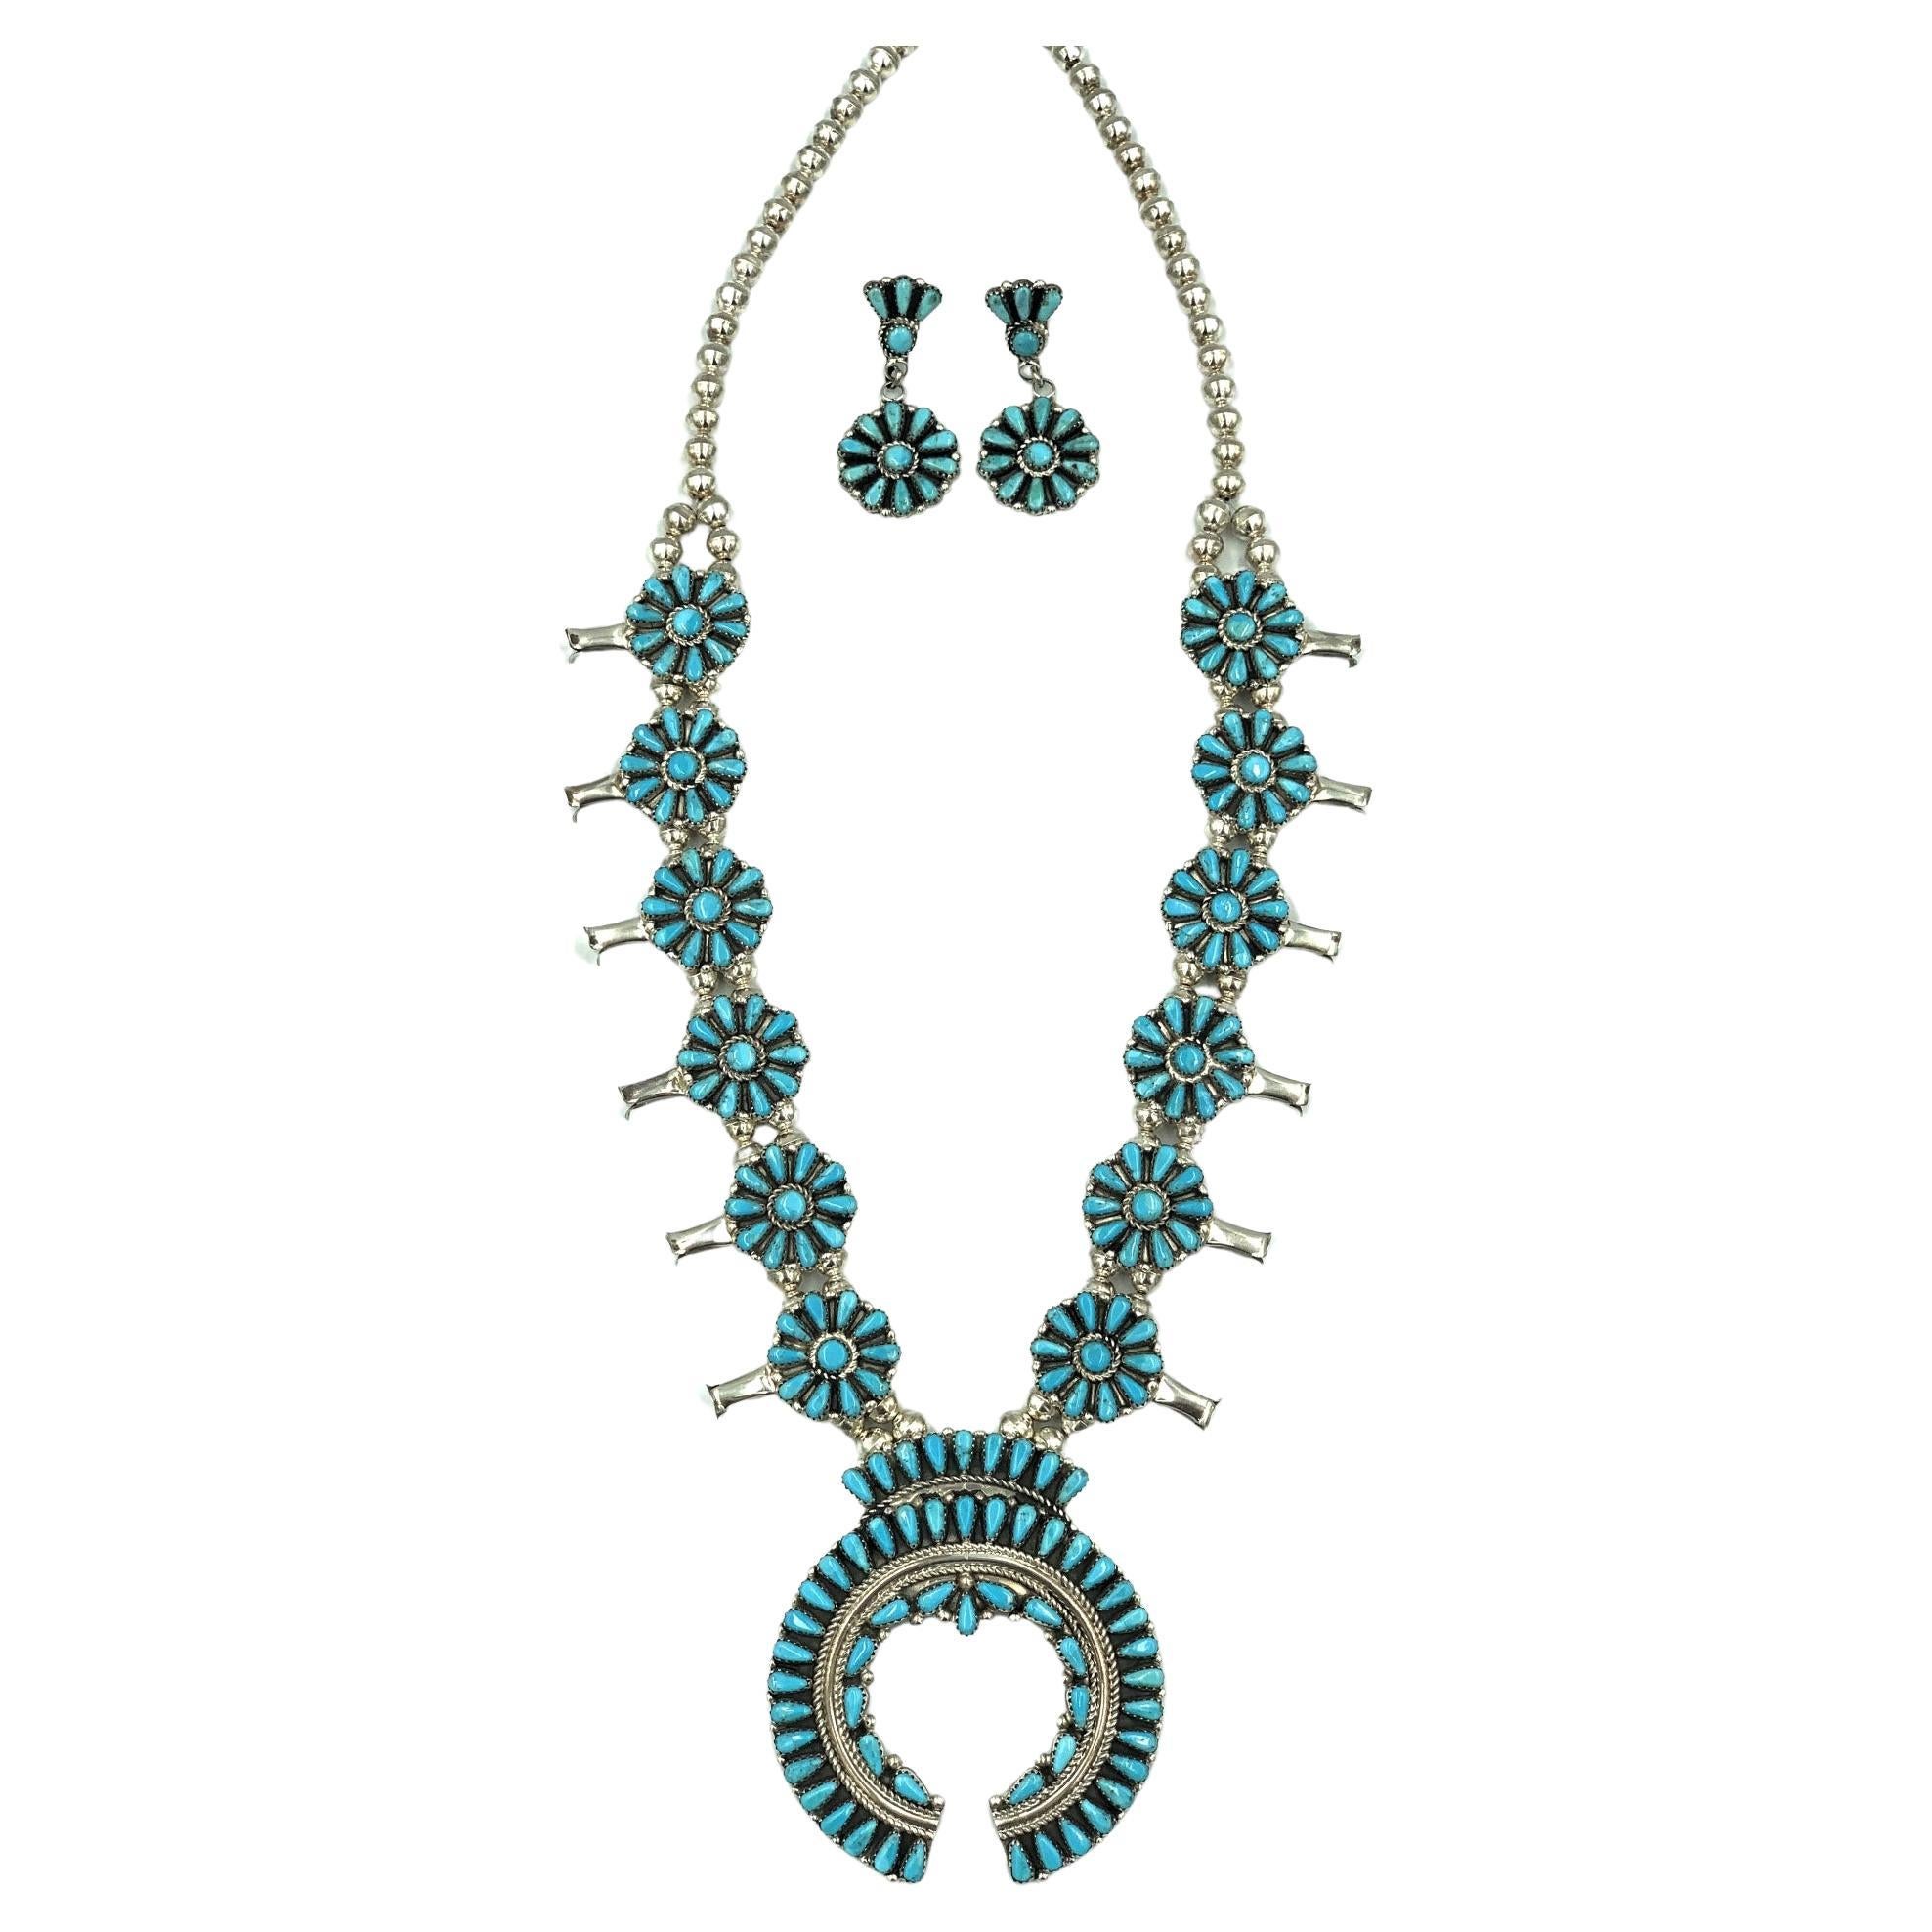 Sleeping Beauty Turquoise Squash Blossom Necklace and Earring Set by Violet Nez For Sale